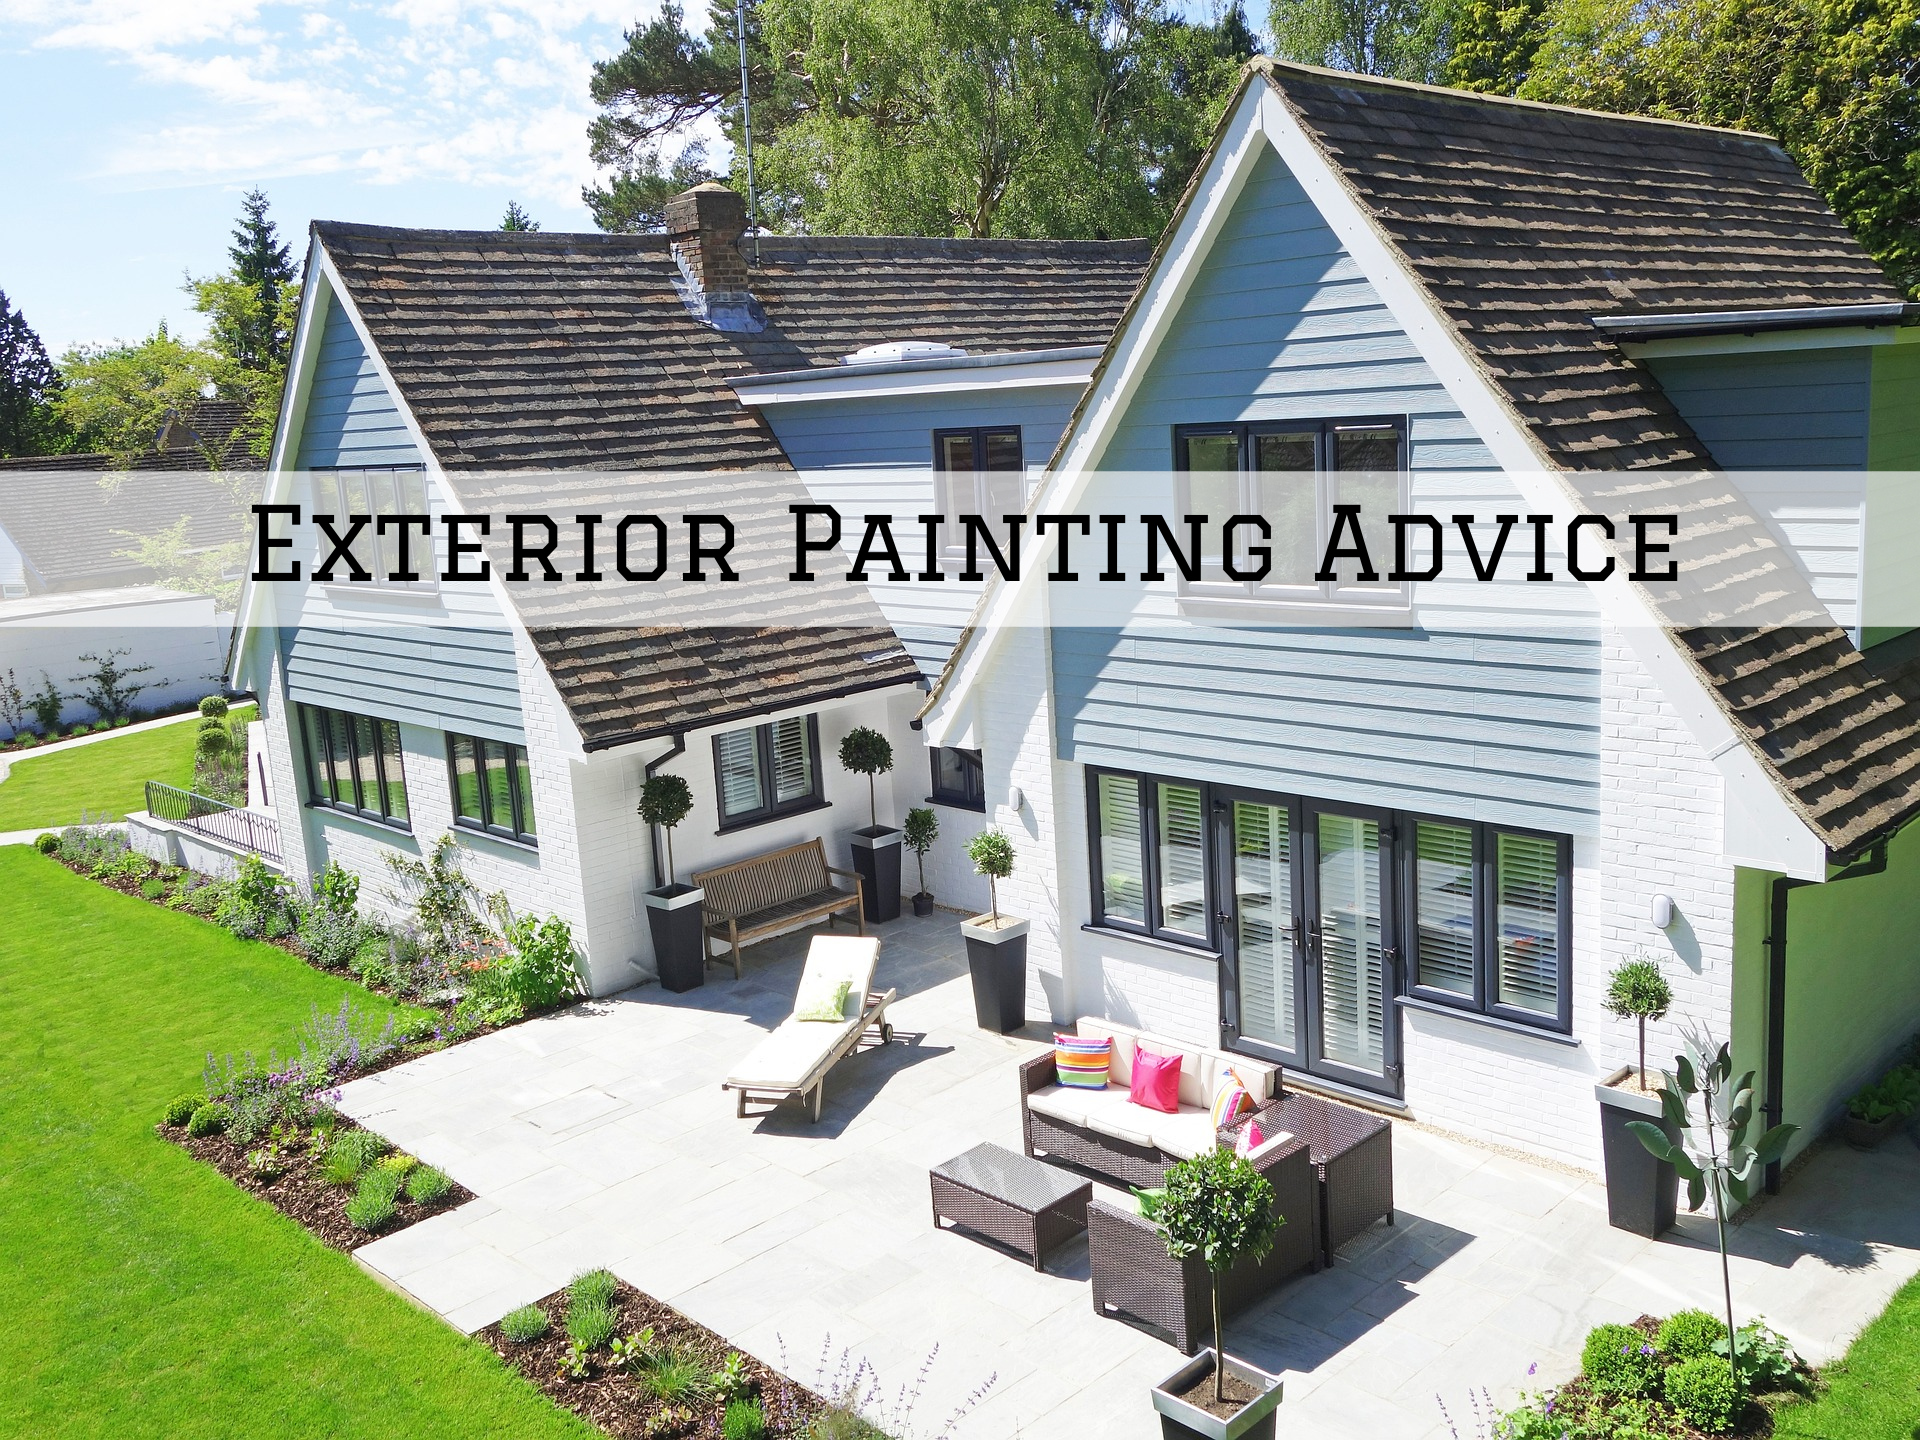 2023-12-26 Left Moon Painting Greenville DE Exterior Painting Advice